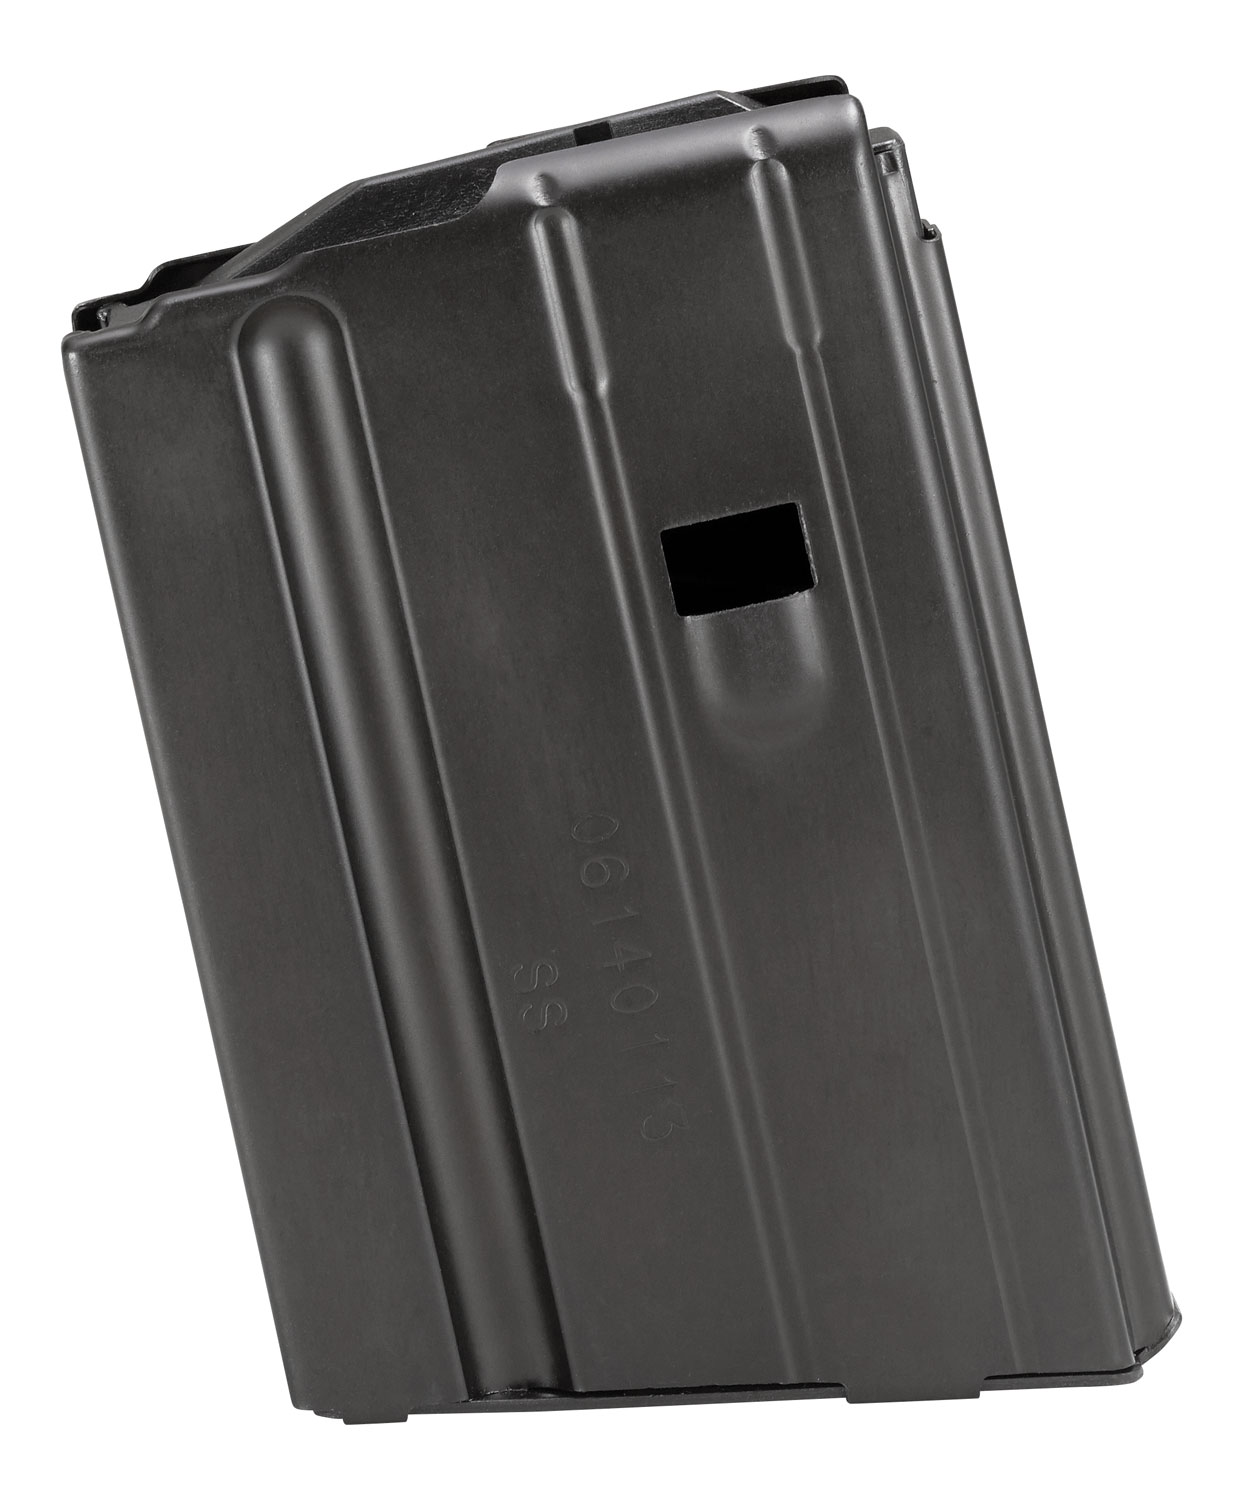 CPD MAGAZINE AR15 7.62X39 10RD BLACKENED STAINLESS STEEL